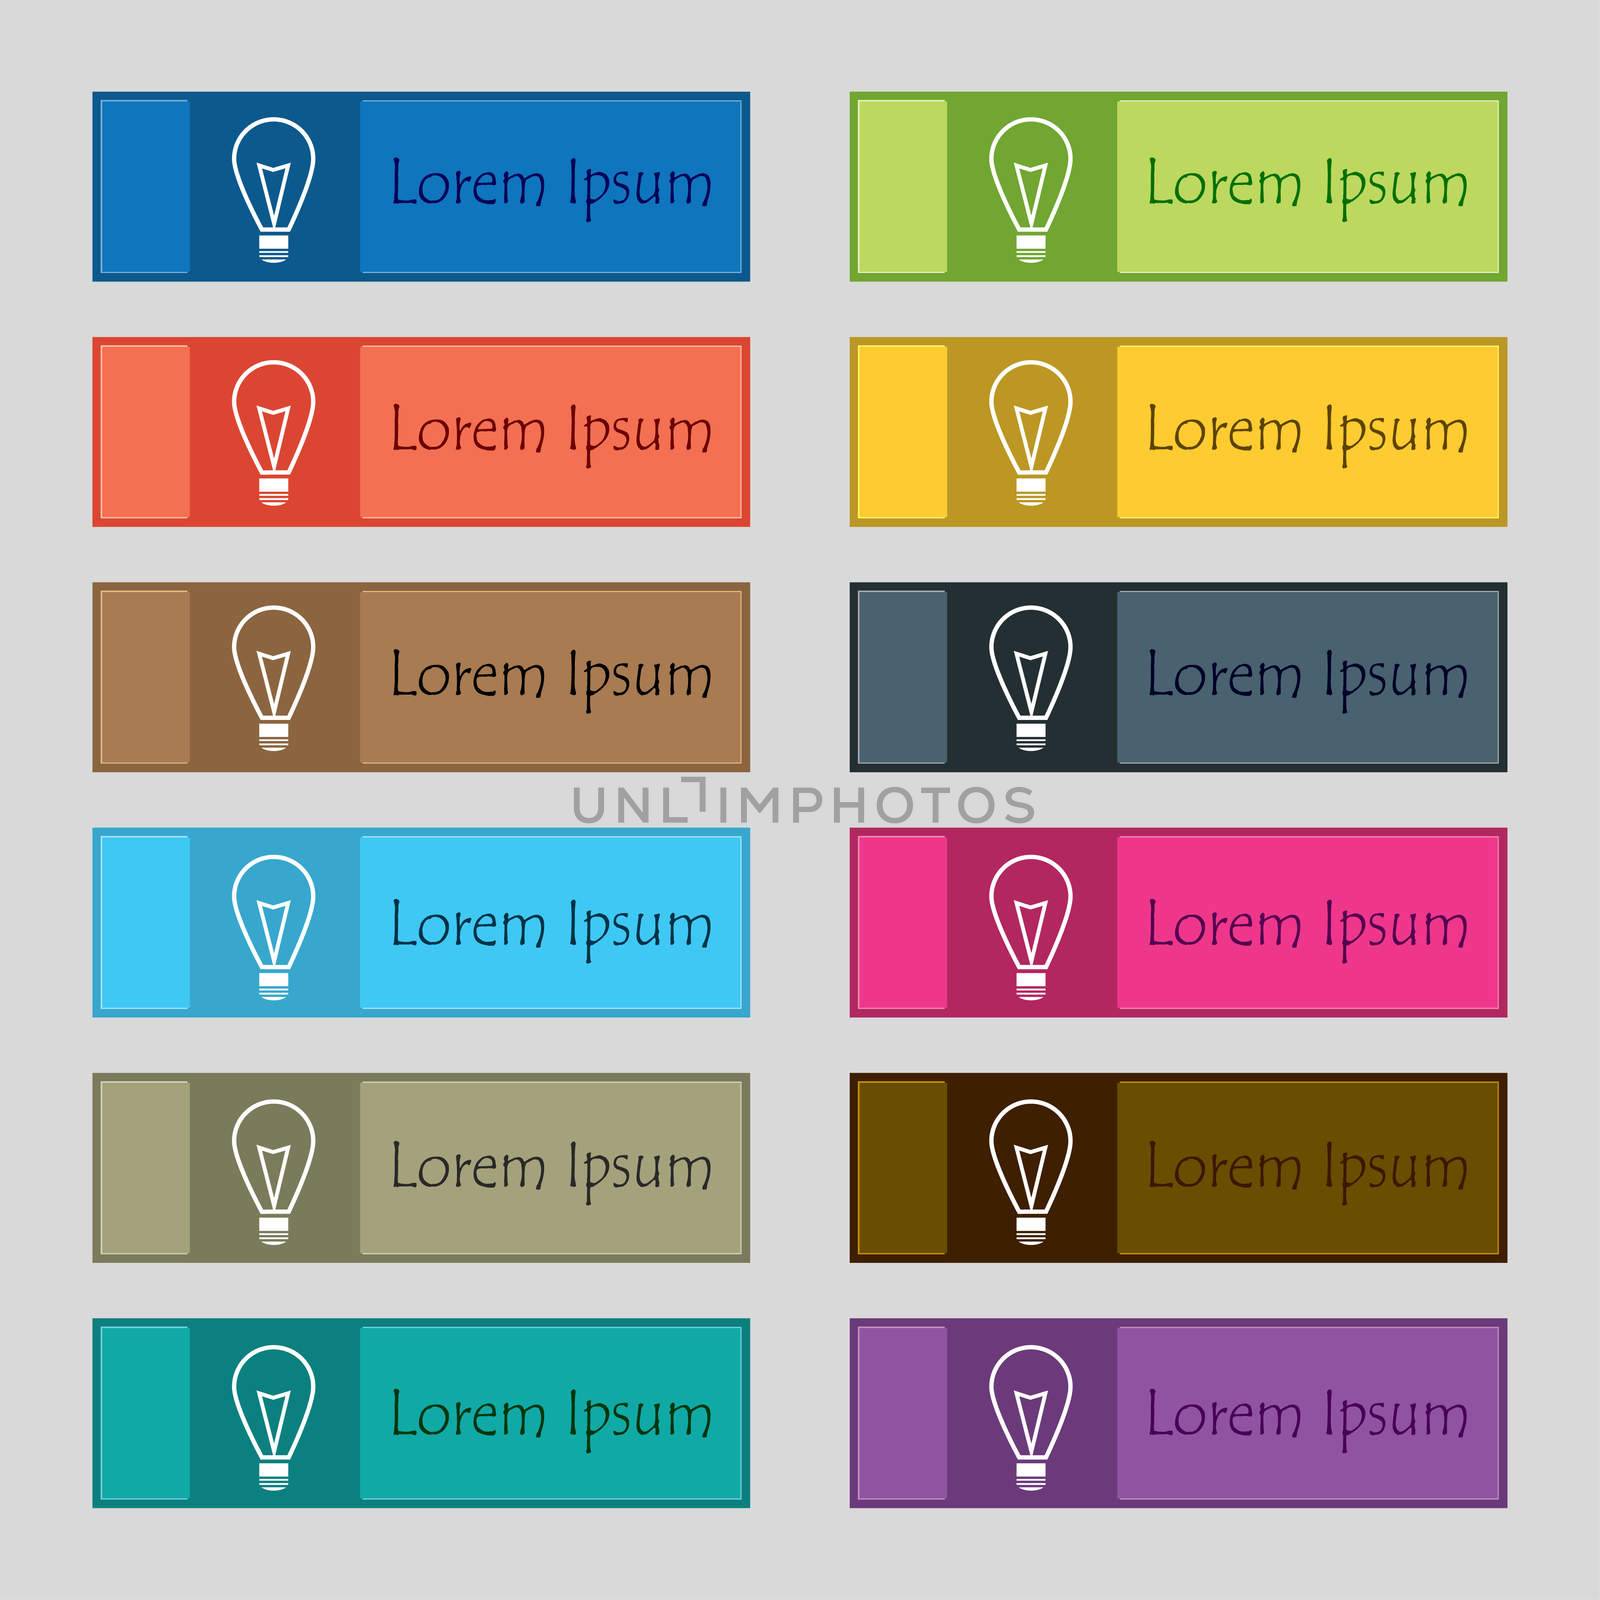 Light lamp sign icon. Idea symbol. Lightis on. Set of colored buttons.  by serhii_lohvyniuk